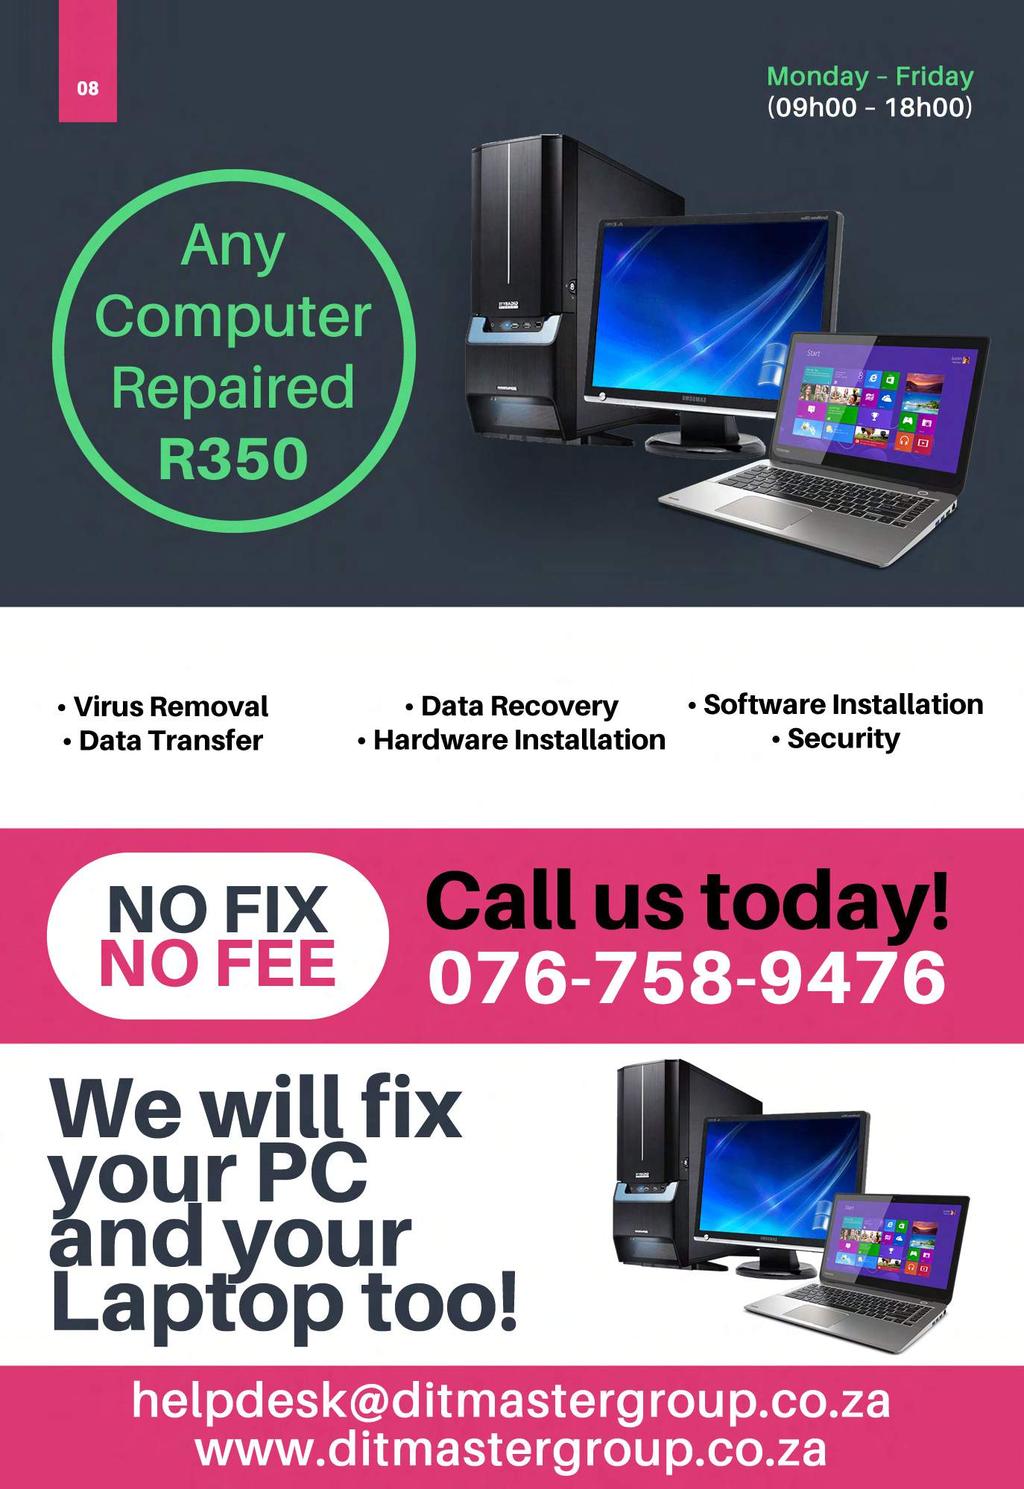 08 Monday Friday (09h00 18h00) Any Computer Repaired R350 Virus Removal Data Transfer Data Recovery Hardware Installation Software Installation